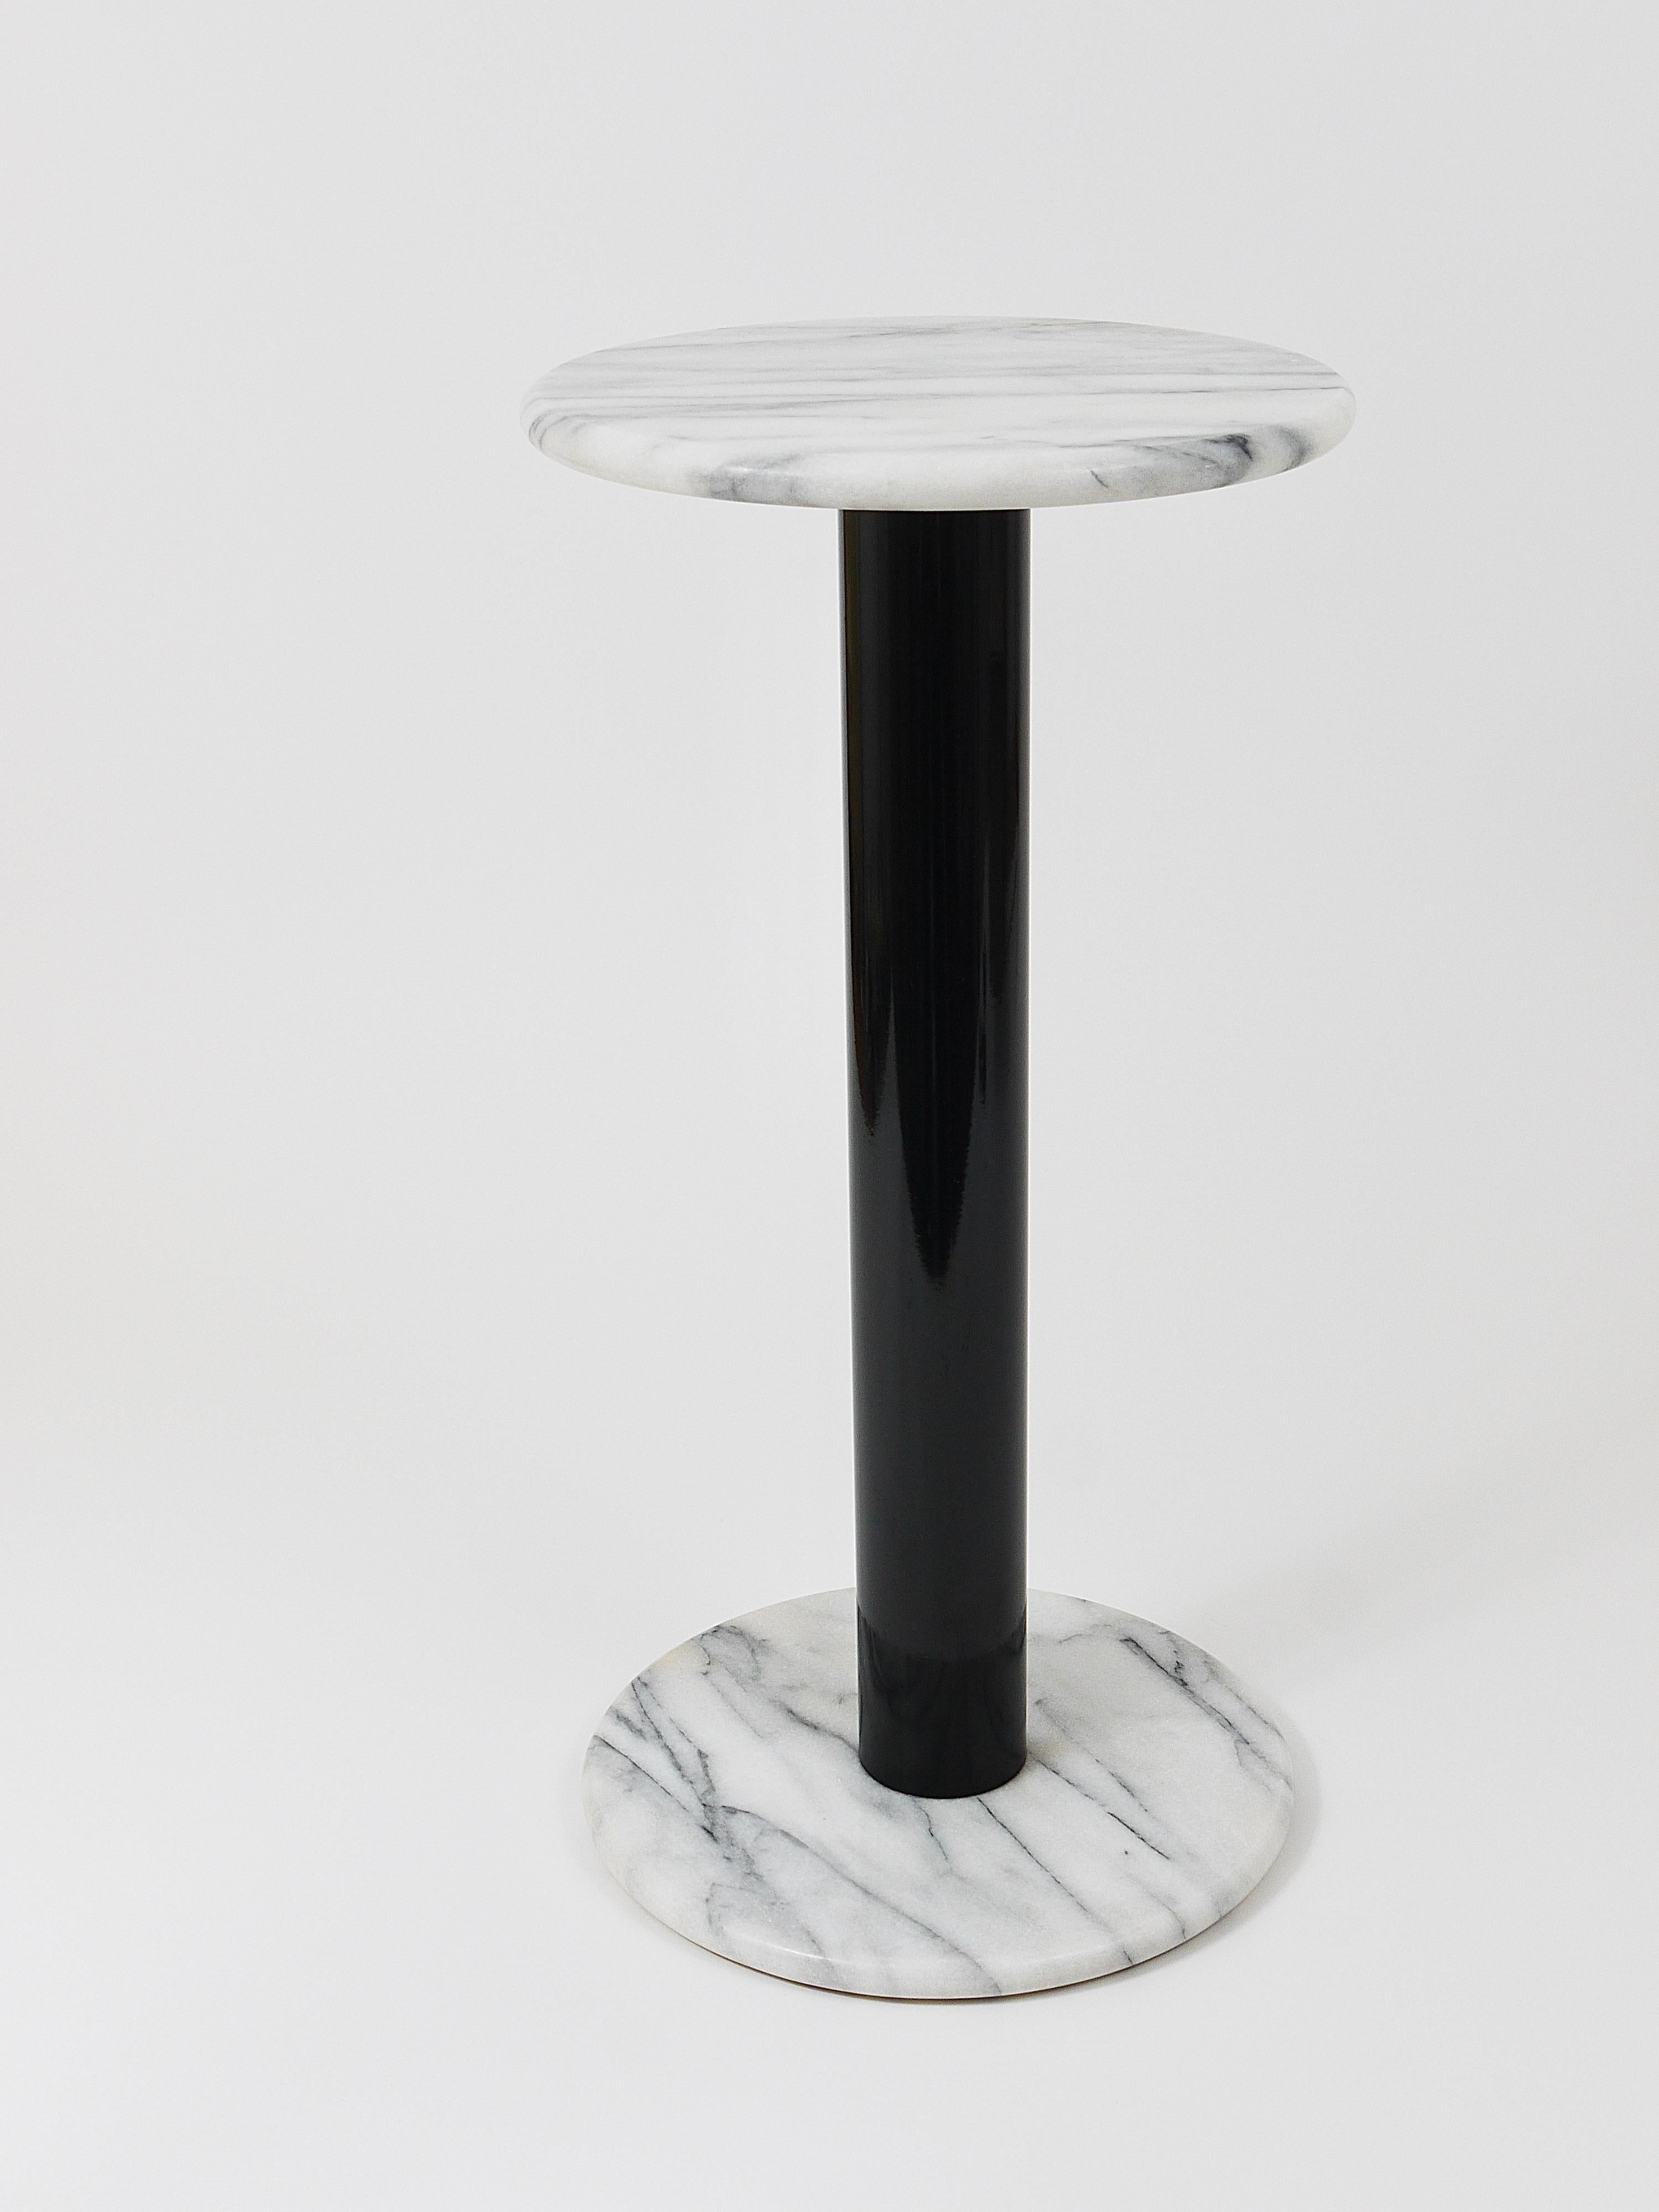 Postmodern White Carrara Marble Flower Stand Pedestal Table, Italy, 1980s For Sale 10